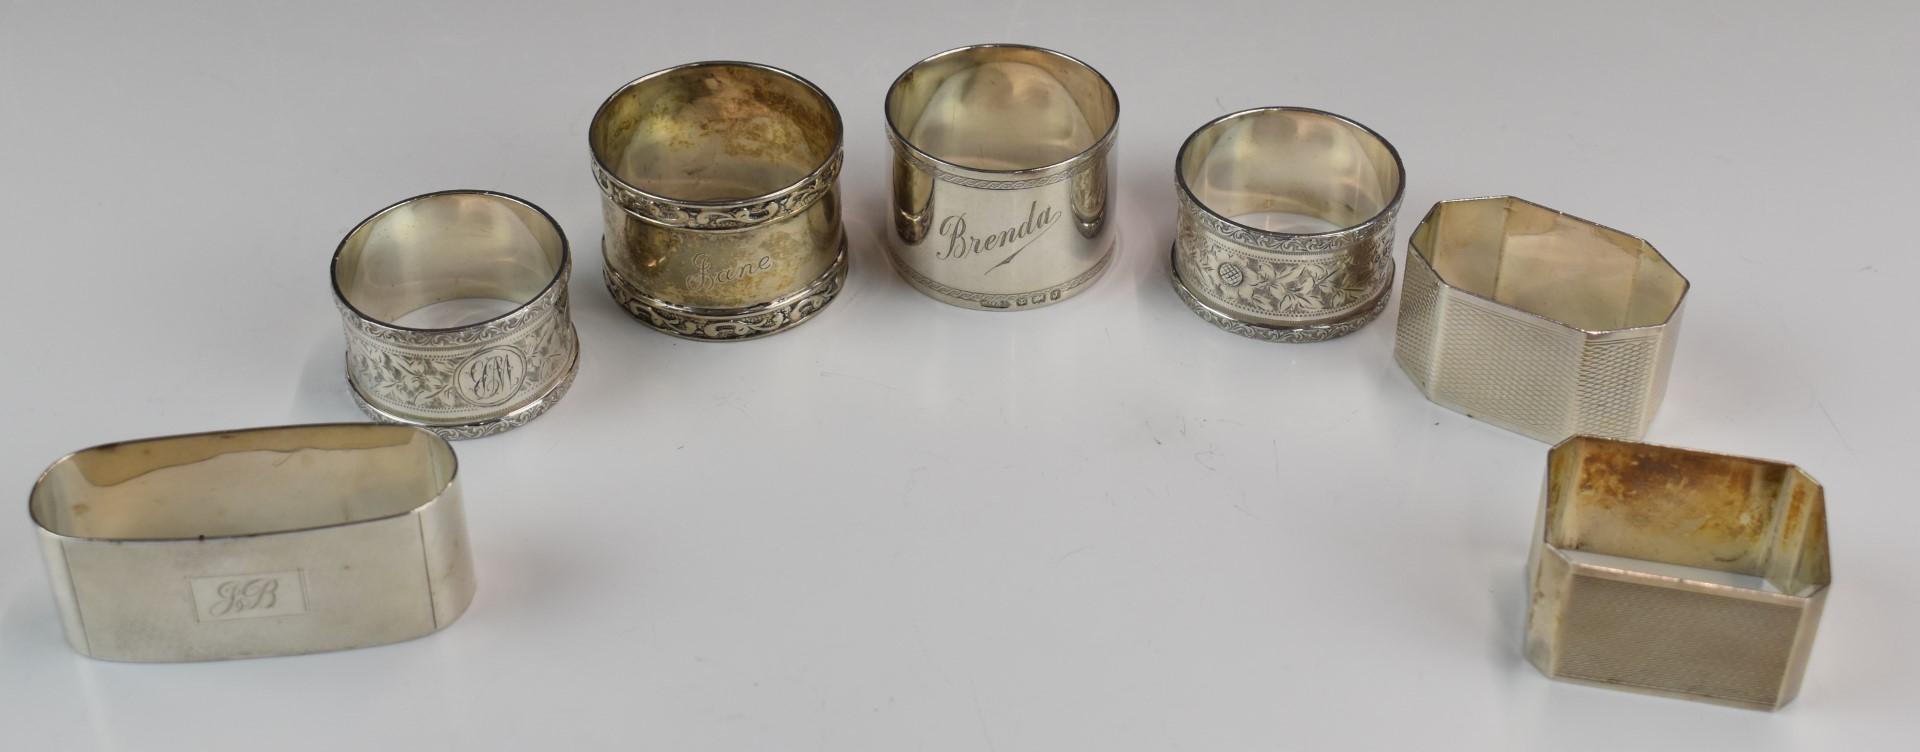 Seven various hallmarked silver napkin rings including a pair of Art Deco style engine turned